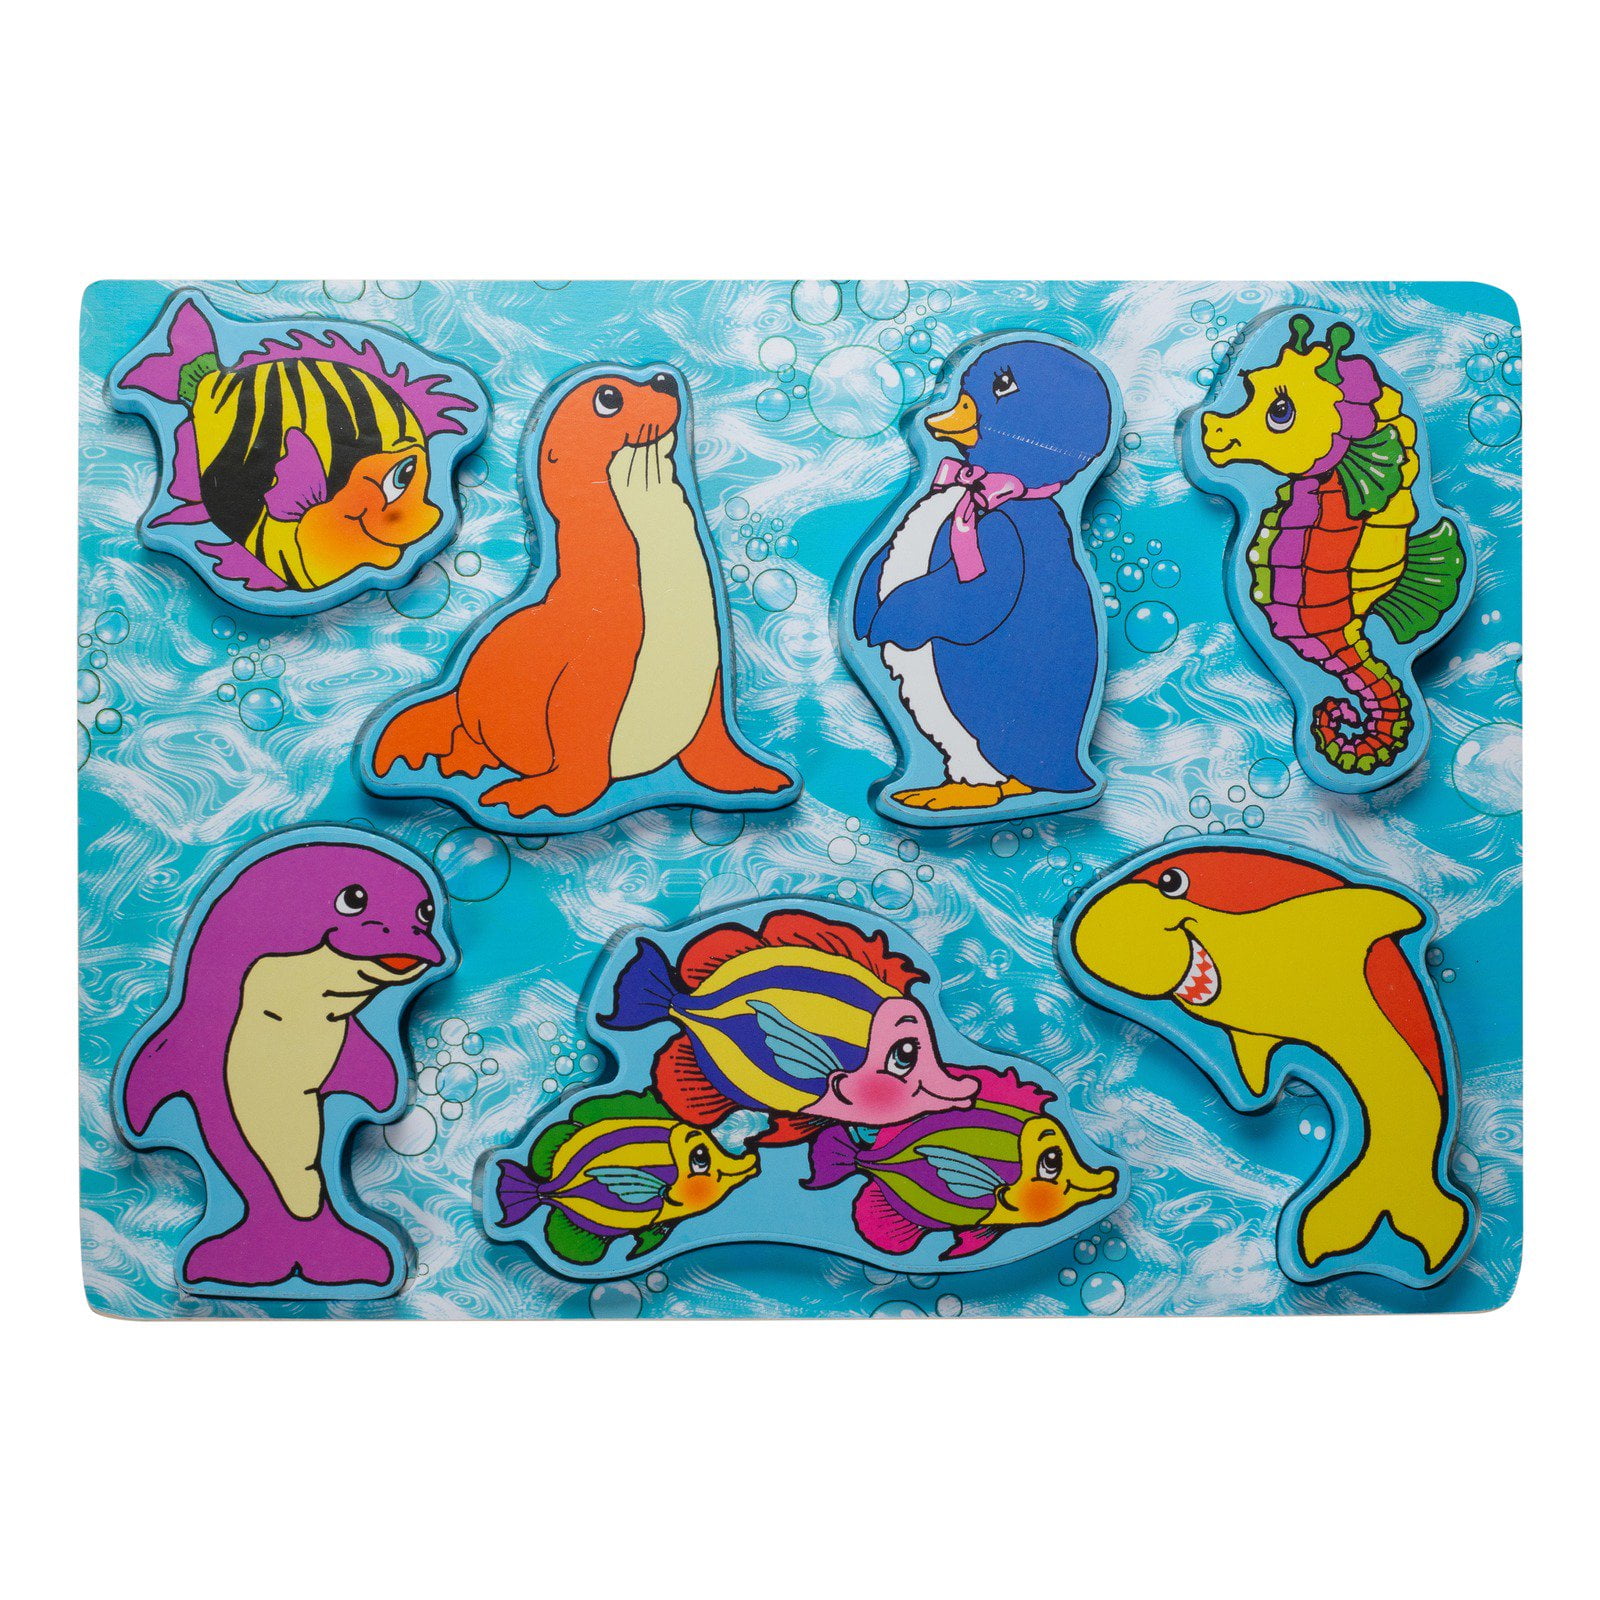 Eliiti Wooden Sea Animals Chunky Puzzle for Toddlers 2 to 4 Years Old Boy Girls 